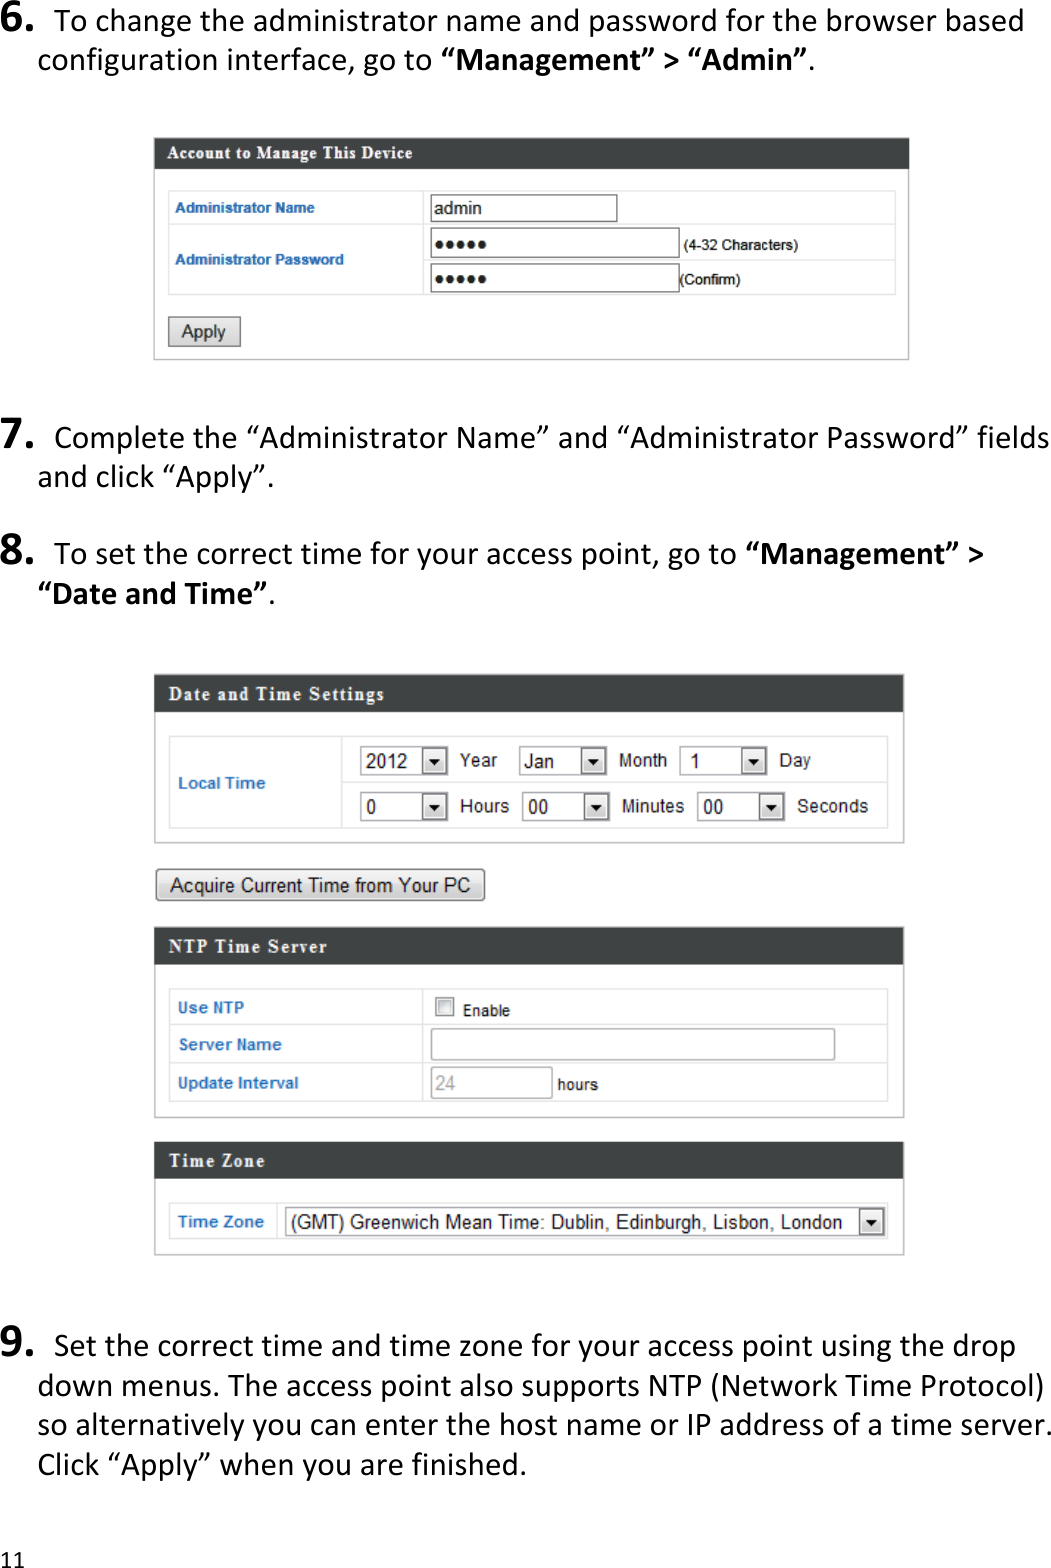 11  6.   To change the administrator name and password for the browser based configuration interface, go to “Management” &gt; “Admin”.    7.  Complete the “Administrator Name” and “Administrator Password” fields and click “Apply”.  8.   To set the correct time for your access point, go to “Management” &gt; “Date and Time”.    9.   Set the correct time and time zone for your access point using the drop down menus. The access point also supports NTP (Network Time Protocol) so alternatively you can enter the host name or IP address of a time server. Click “Apply” when you are finished.  